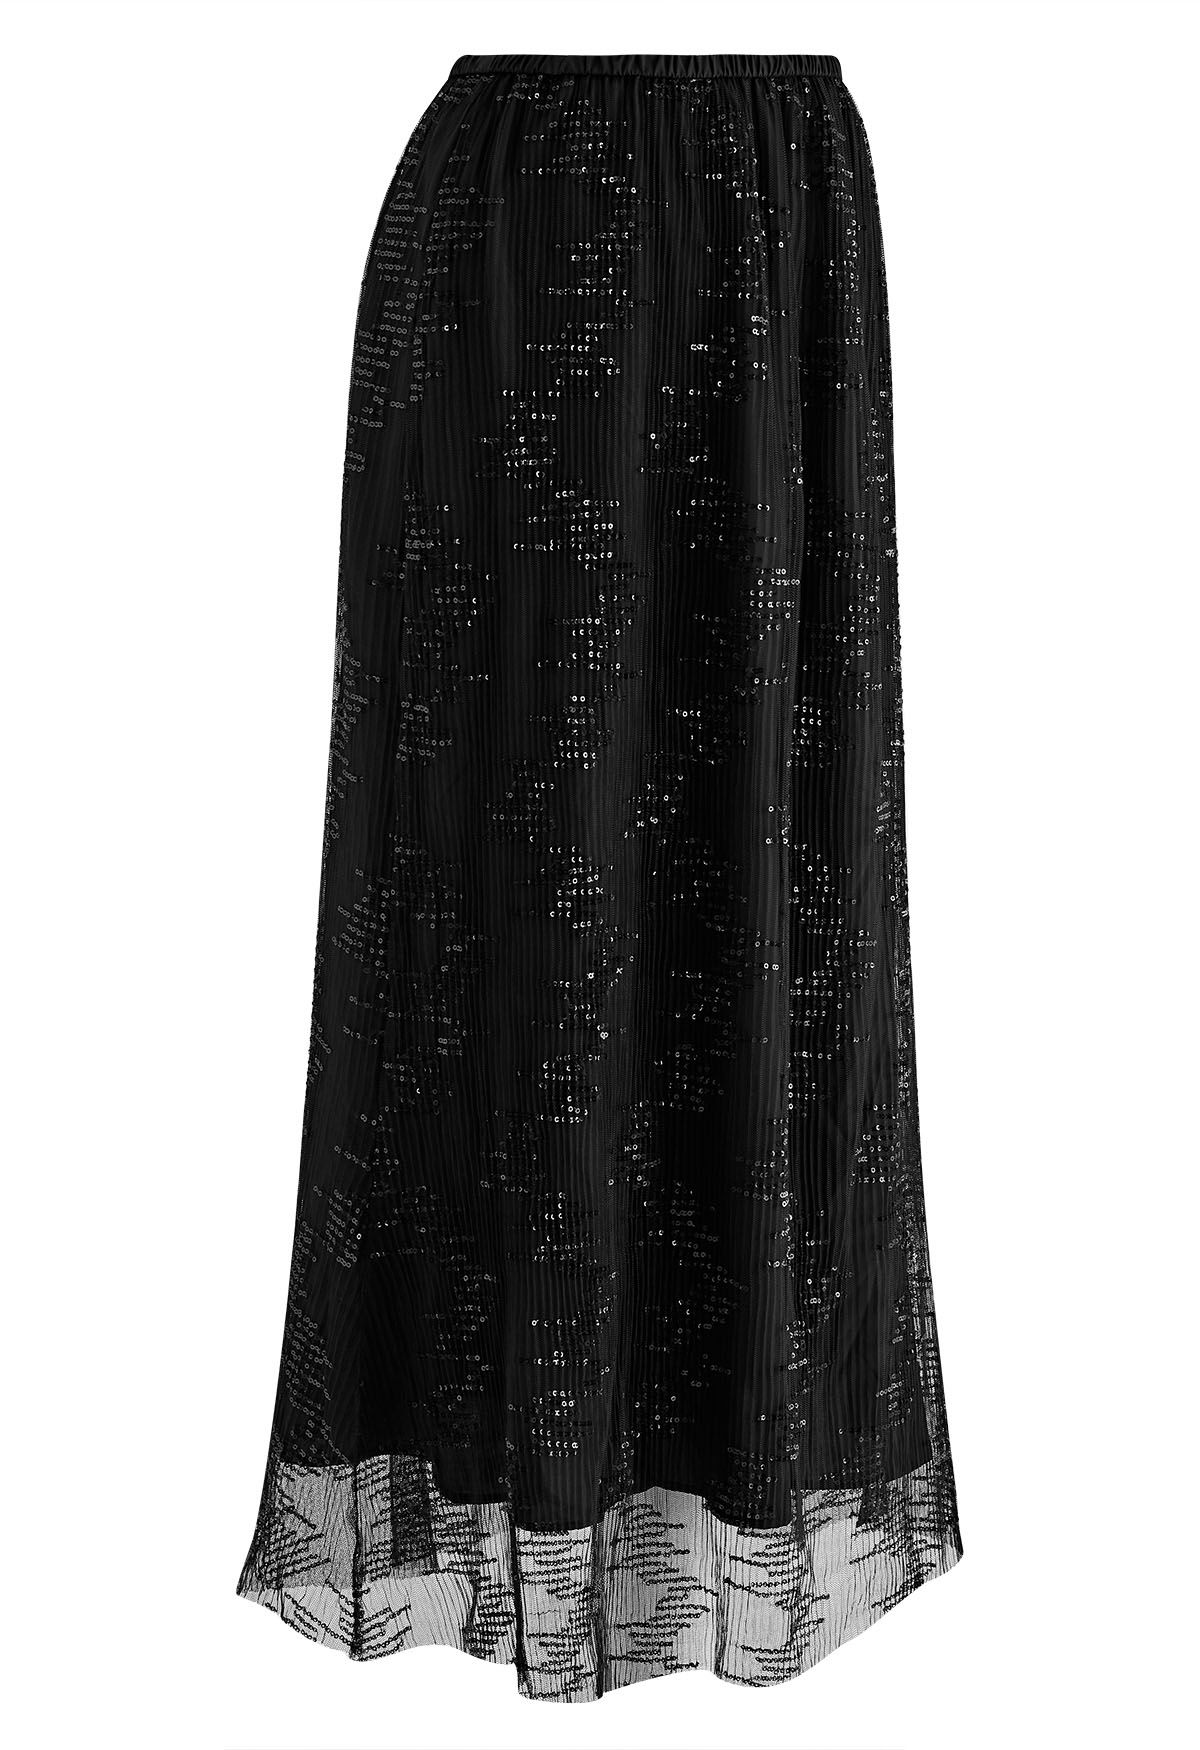 Sequin Embellished Mesh Maxi Skirt in Black - Retro, Indie and Unique ...